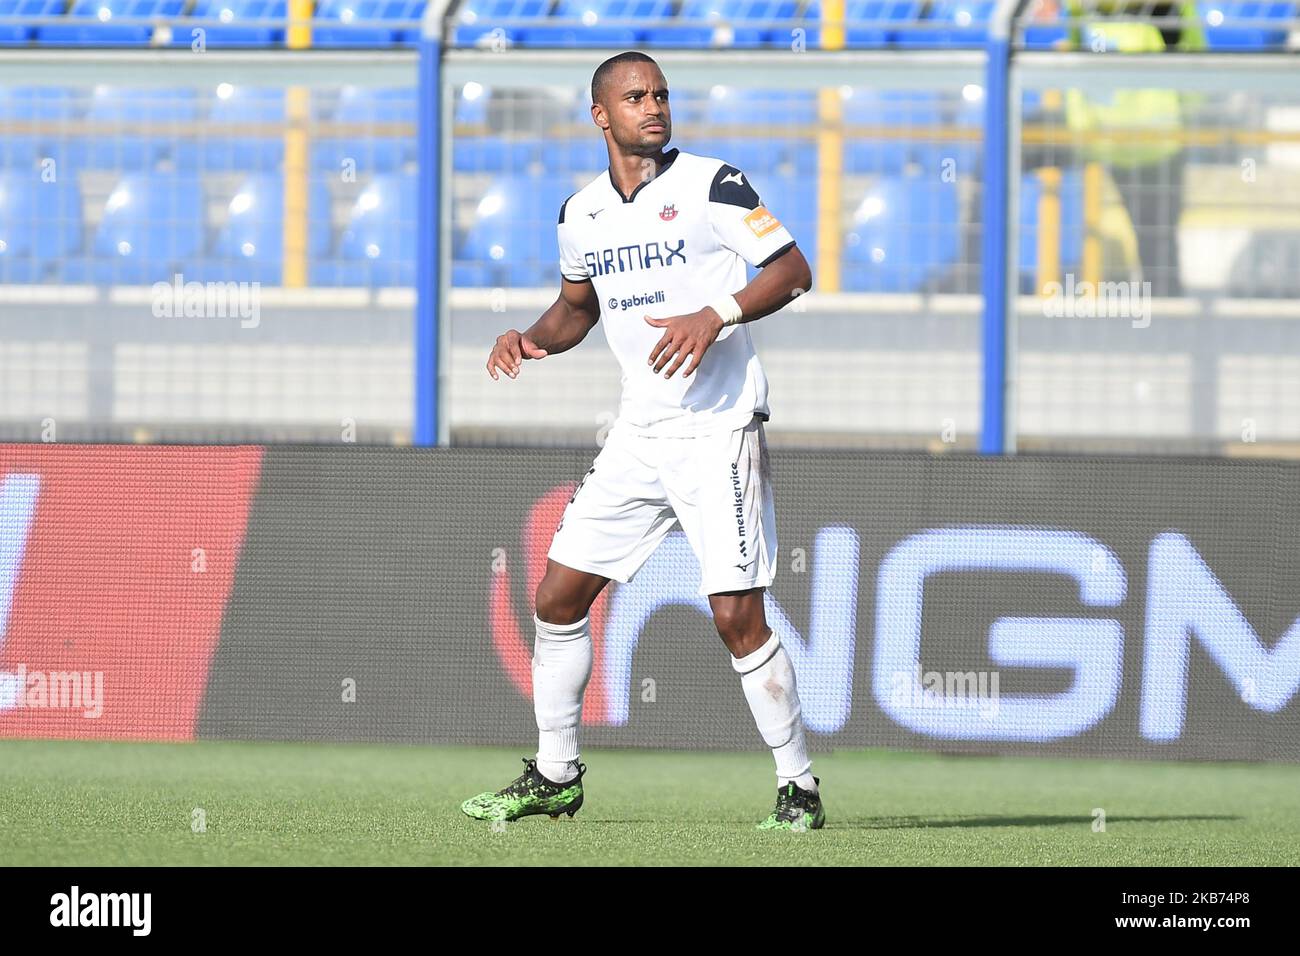 Davide Diaw of AS Cittadella during the Serie B match between Juve Stabia and AS Cittadella at Stadio Romeo Menti Castellammare di Stabia Italy on 28 September 2019. (Photo Franco Romano) Stock Photo